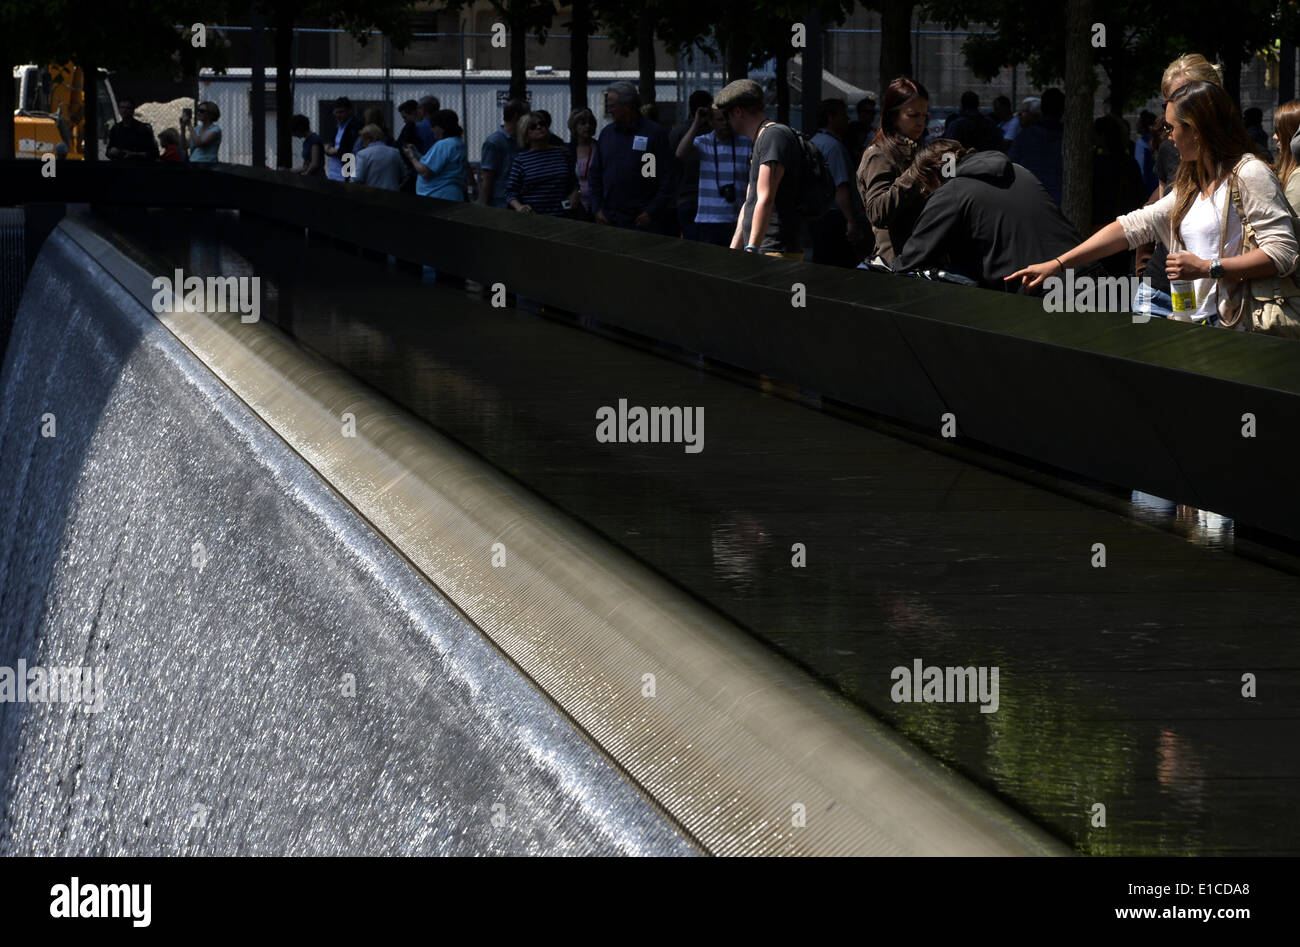 New York, USA. 30th May, 2014. People visit the south reflecting pool at the Ground Zero in New York, the United States, May 30, 2014. A wreath laying ceremony was held in honor of the thousands of rescue and recovery workers to mark the 12th anniversary of the official end of the rescue and recovery effort. On May 30, 2002, the Last Column was the final piece of steel to be removed from Ground Zero. Credit:  Wang Lei/Xinhua/Alamy Live News Stock Photo